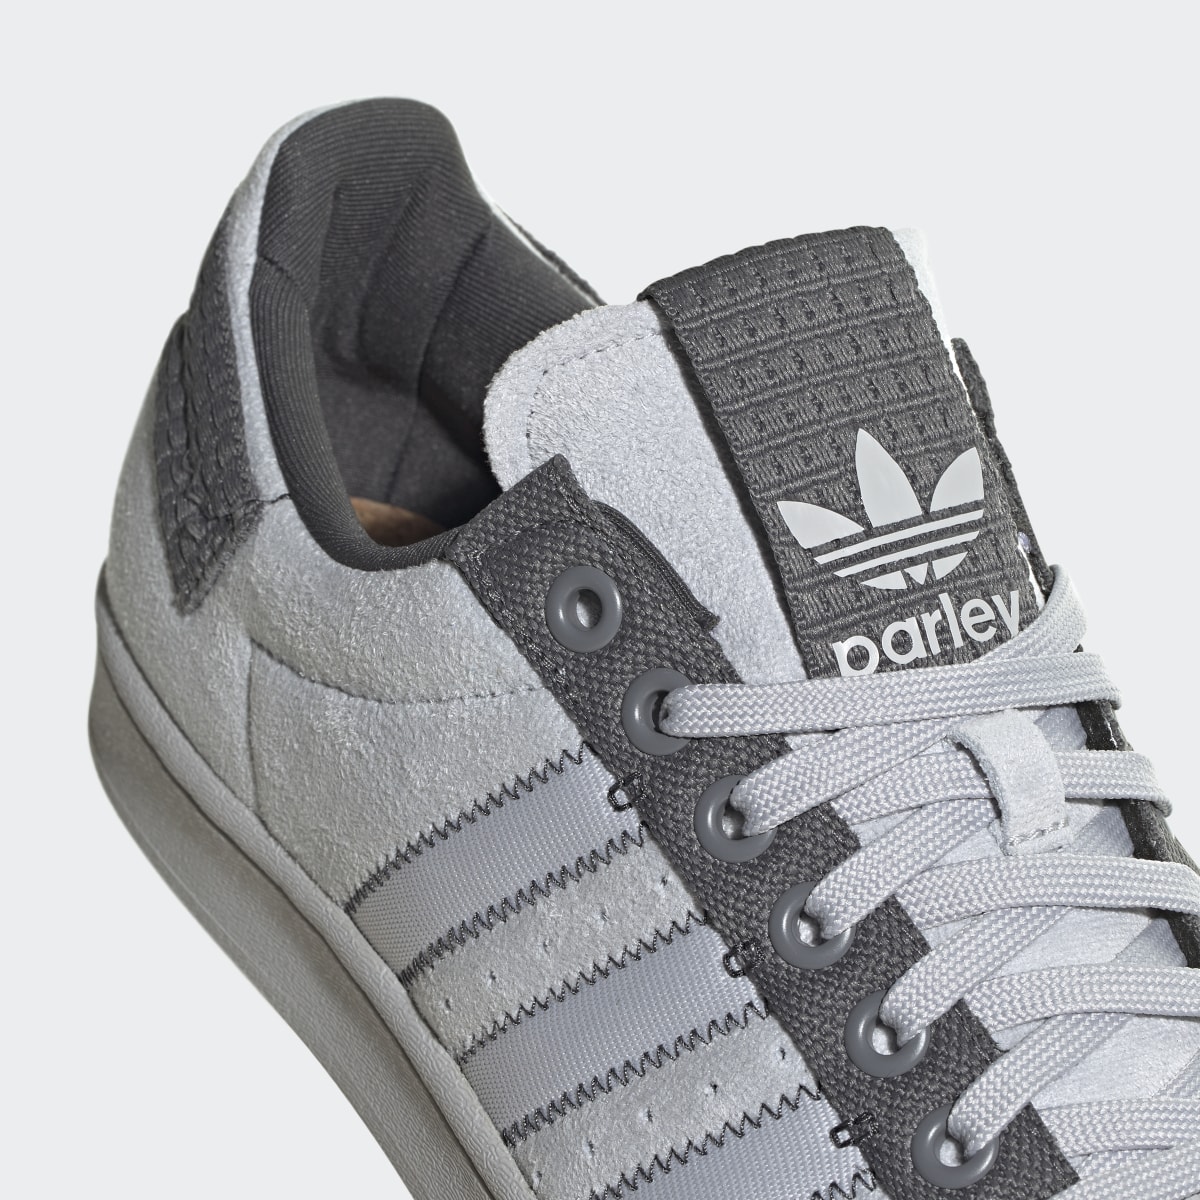 Adidas Superstar Parley Shoes. 12